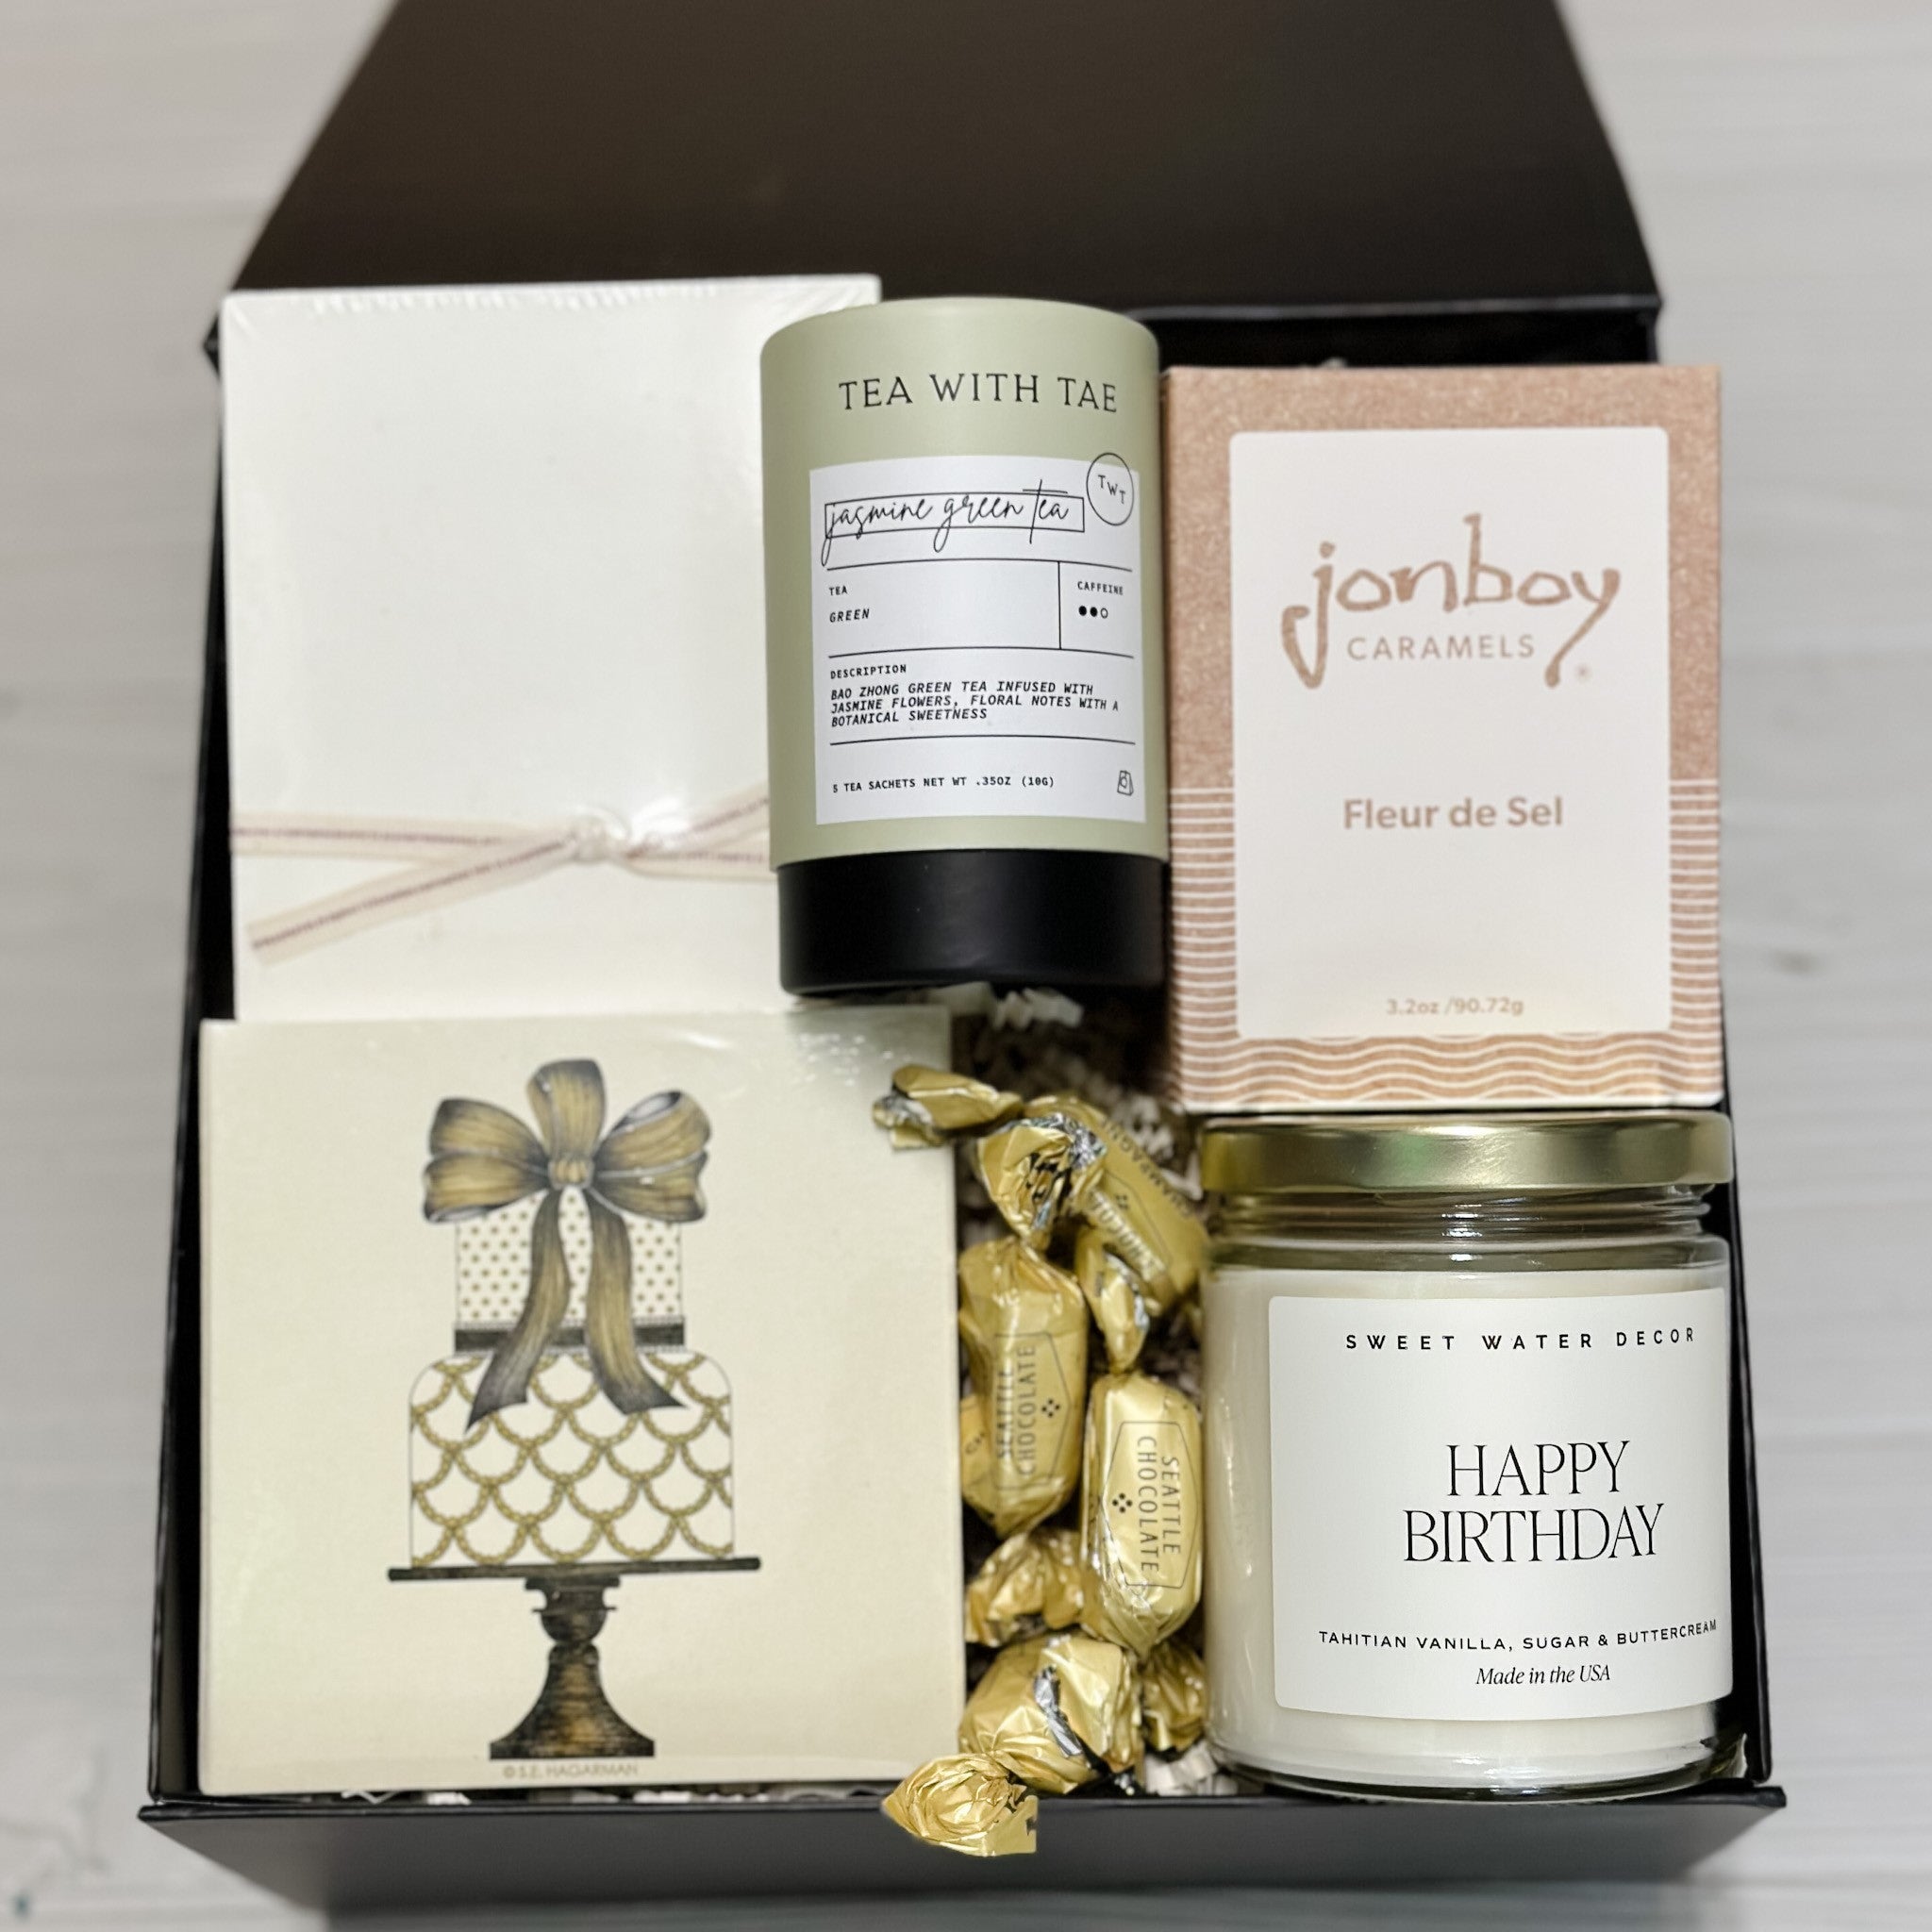 happy birthday candle, tea, caramel, matches, 2 jotter notebooks, truffles included in our Birthday Wishes gift basket